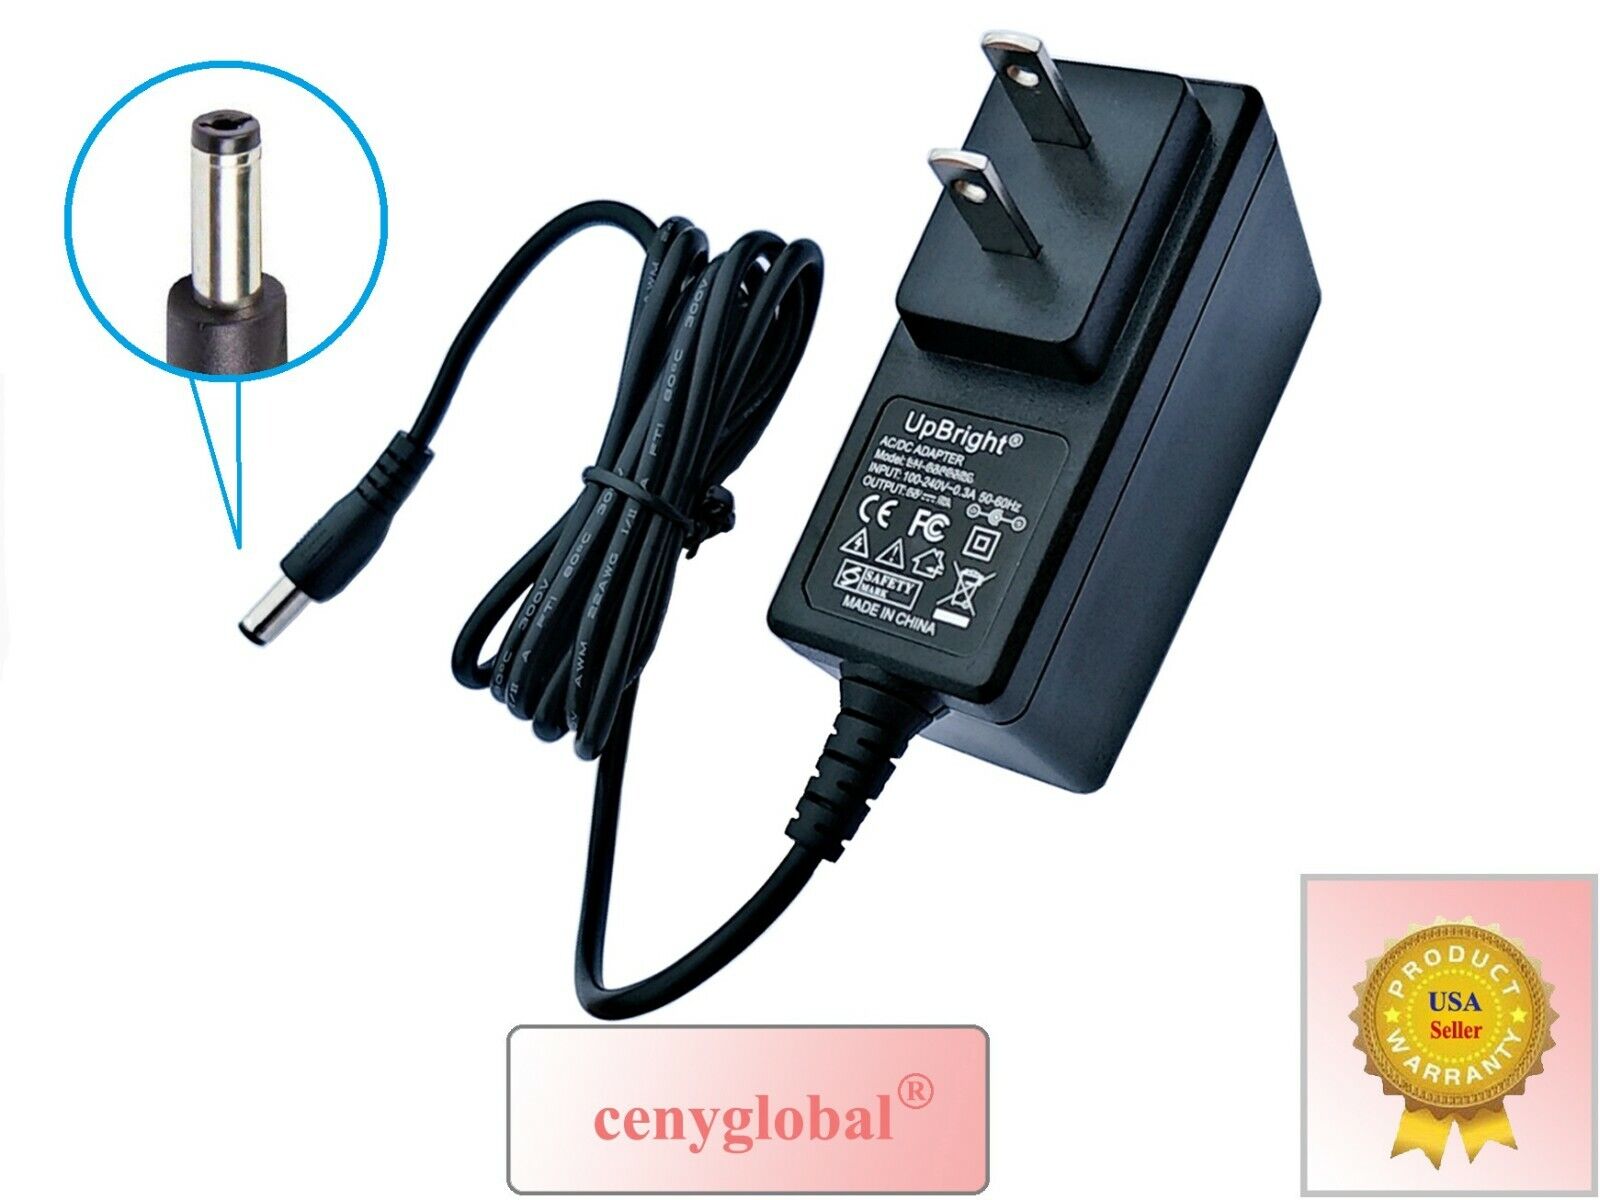 Global AC/DC Adapter For Triad Magnetics WSU 5V-24V Series Power Supply Charger